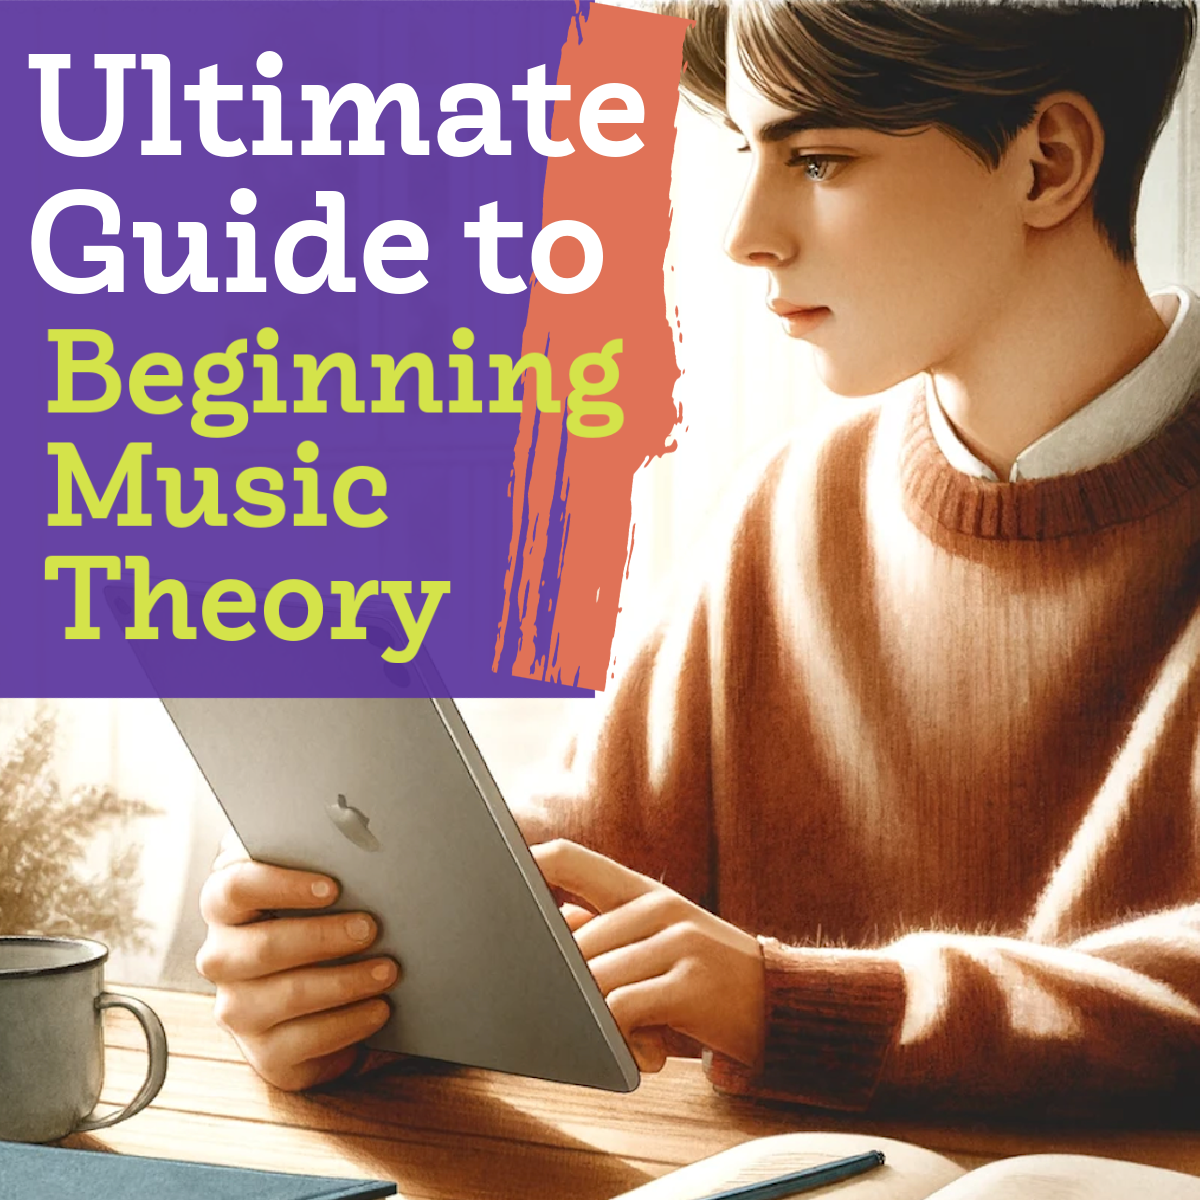 The Ultimate Guide to Beginning Music Theory: How to Ignite a Profound Passion for Music Theory in Your Child and Effectively Teach it in Your Homeschool